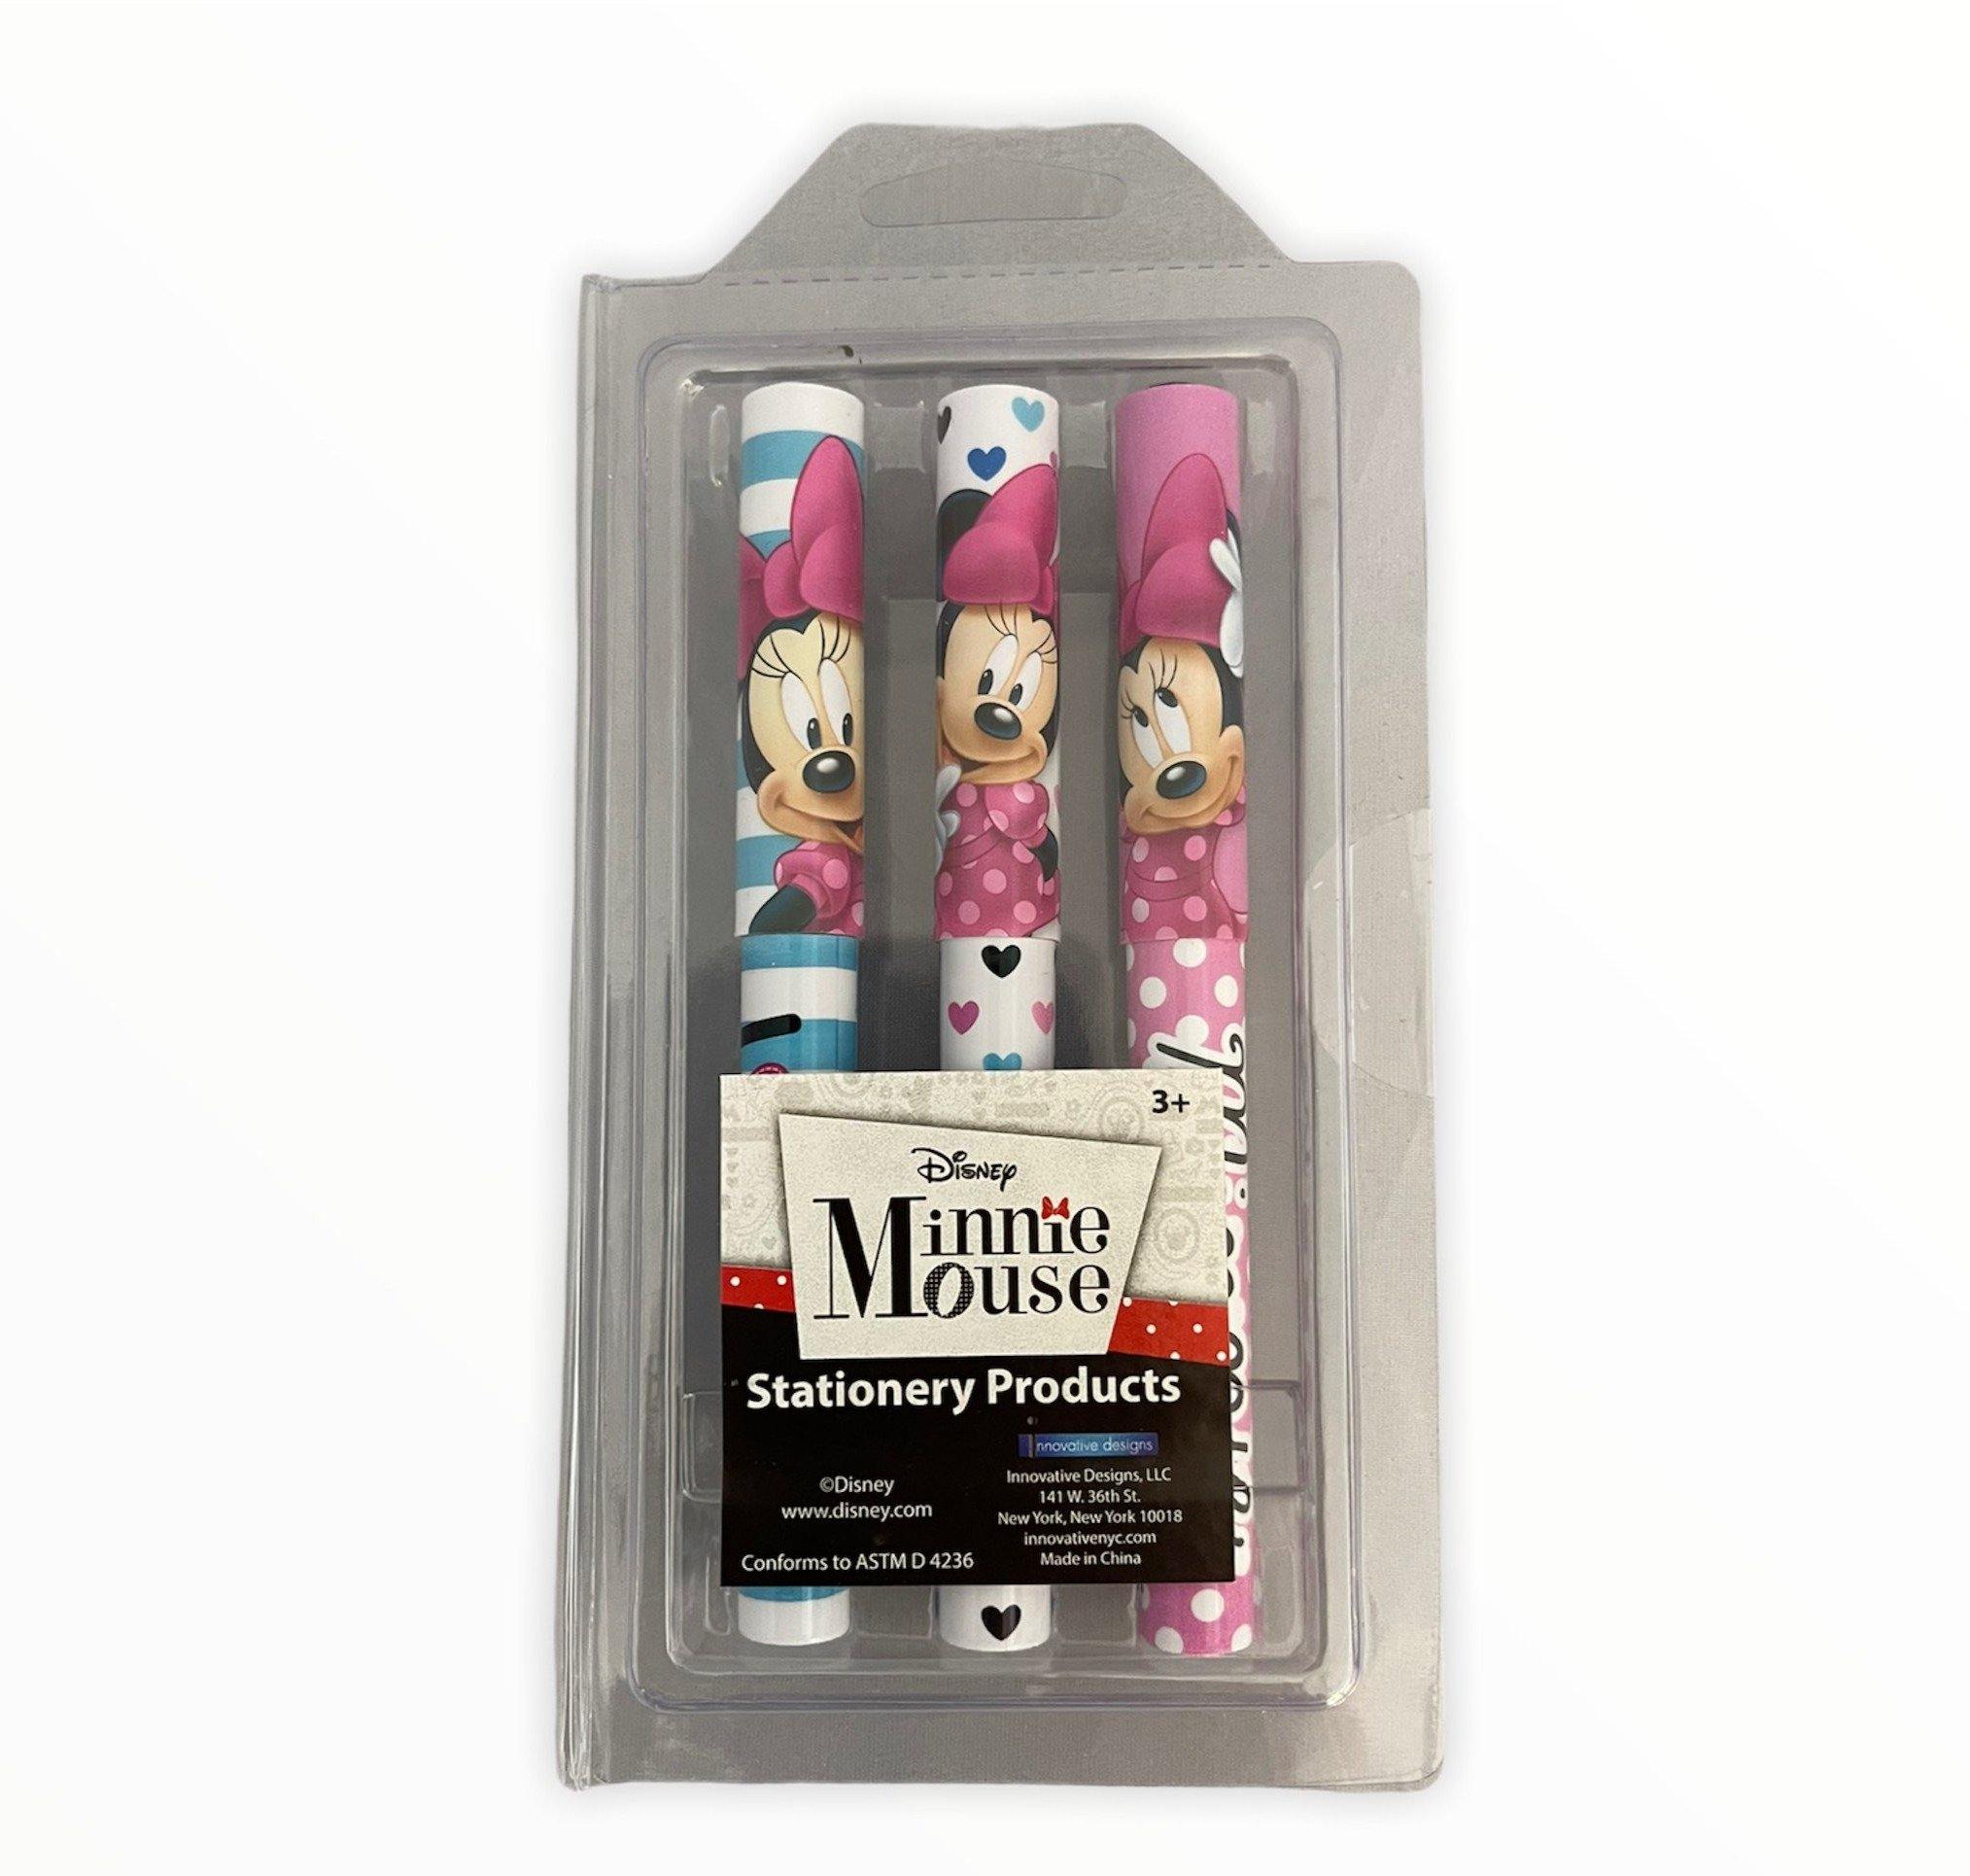 Disney Minnie Mouse "I Love Shopping" 3 Pack of Pens